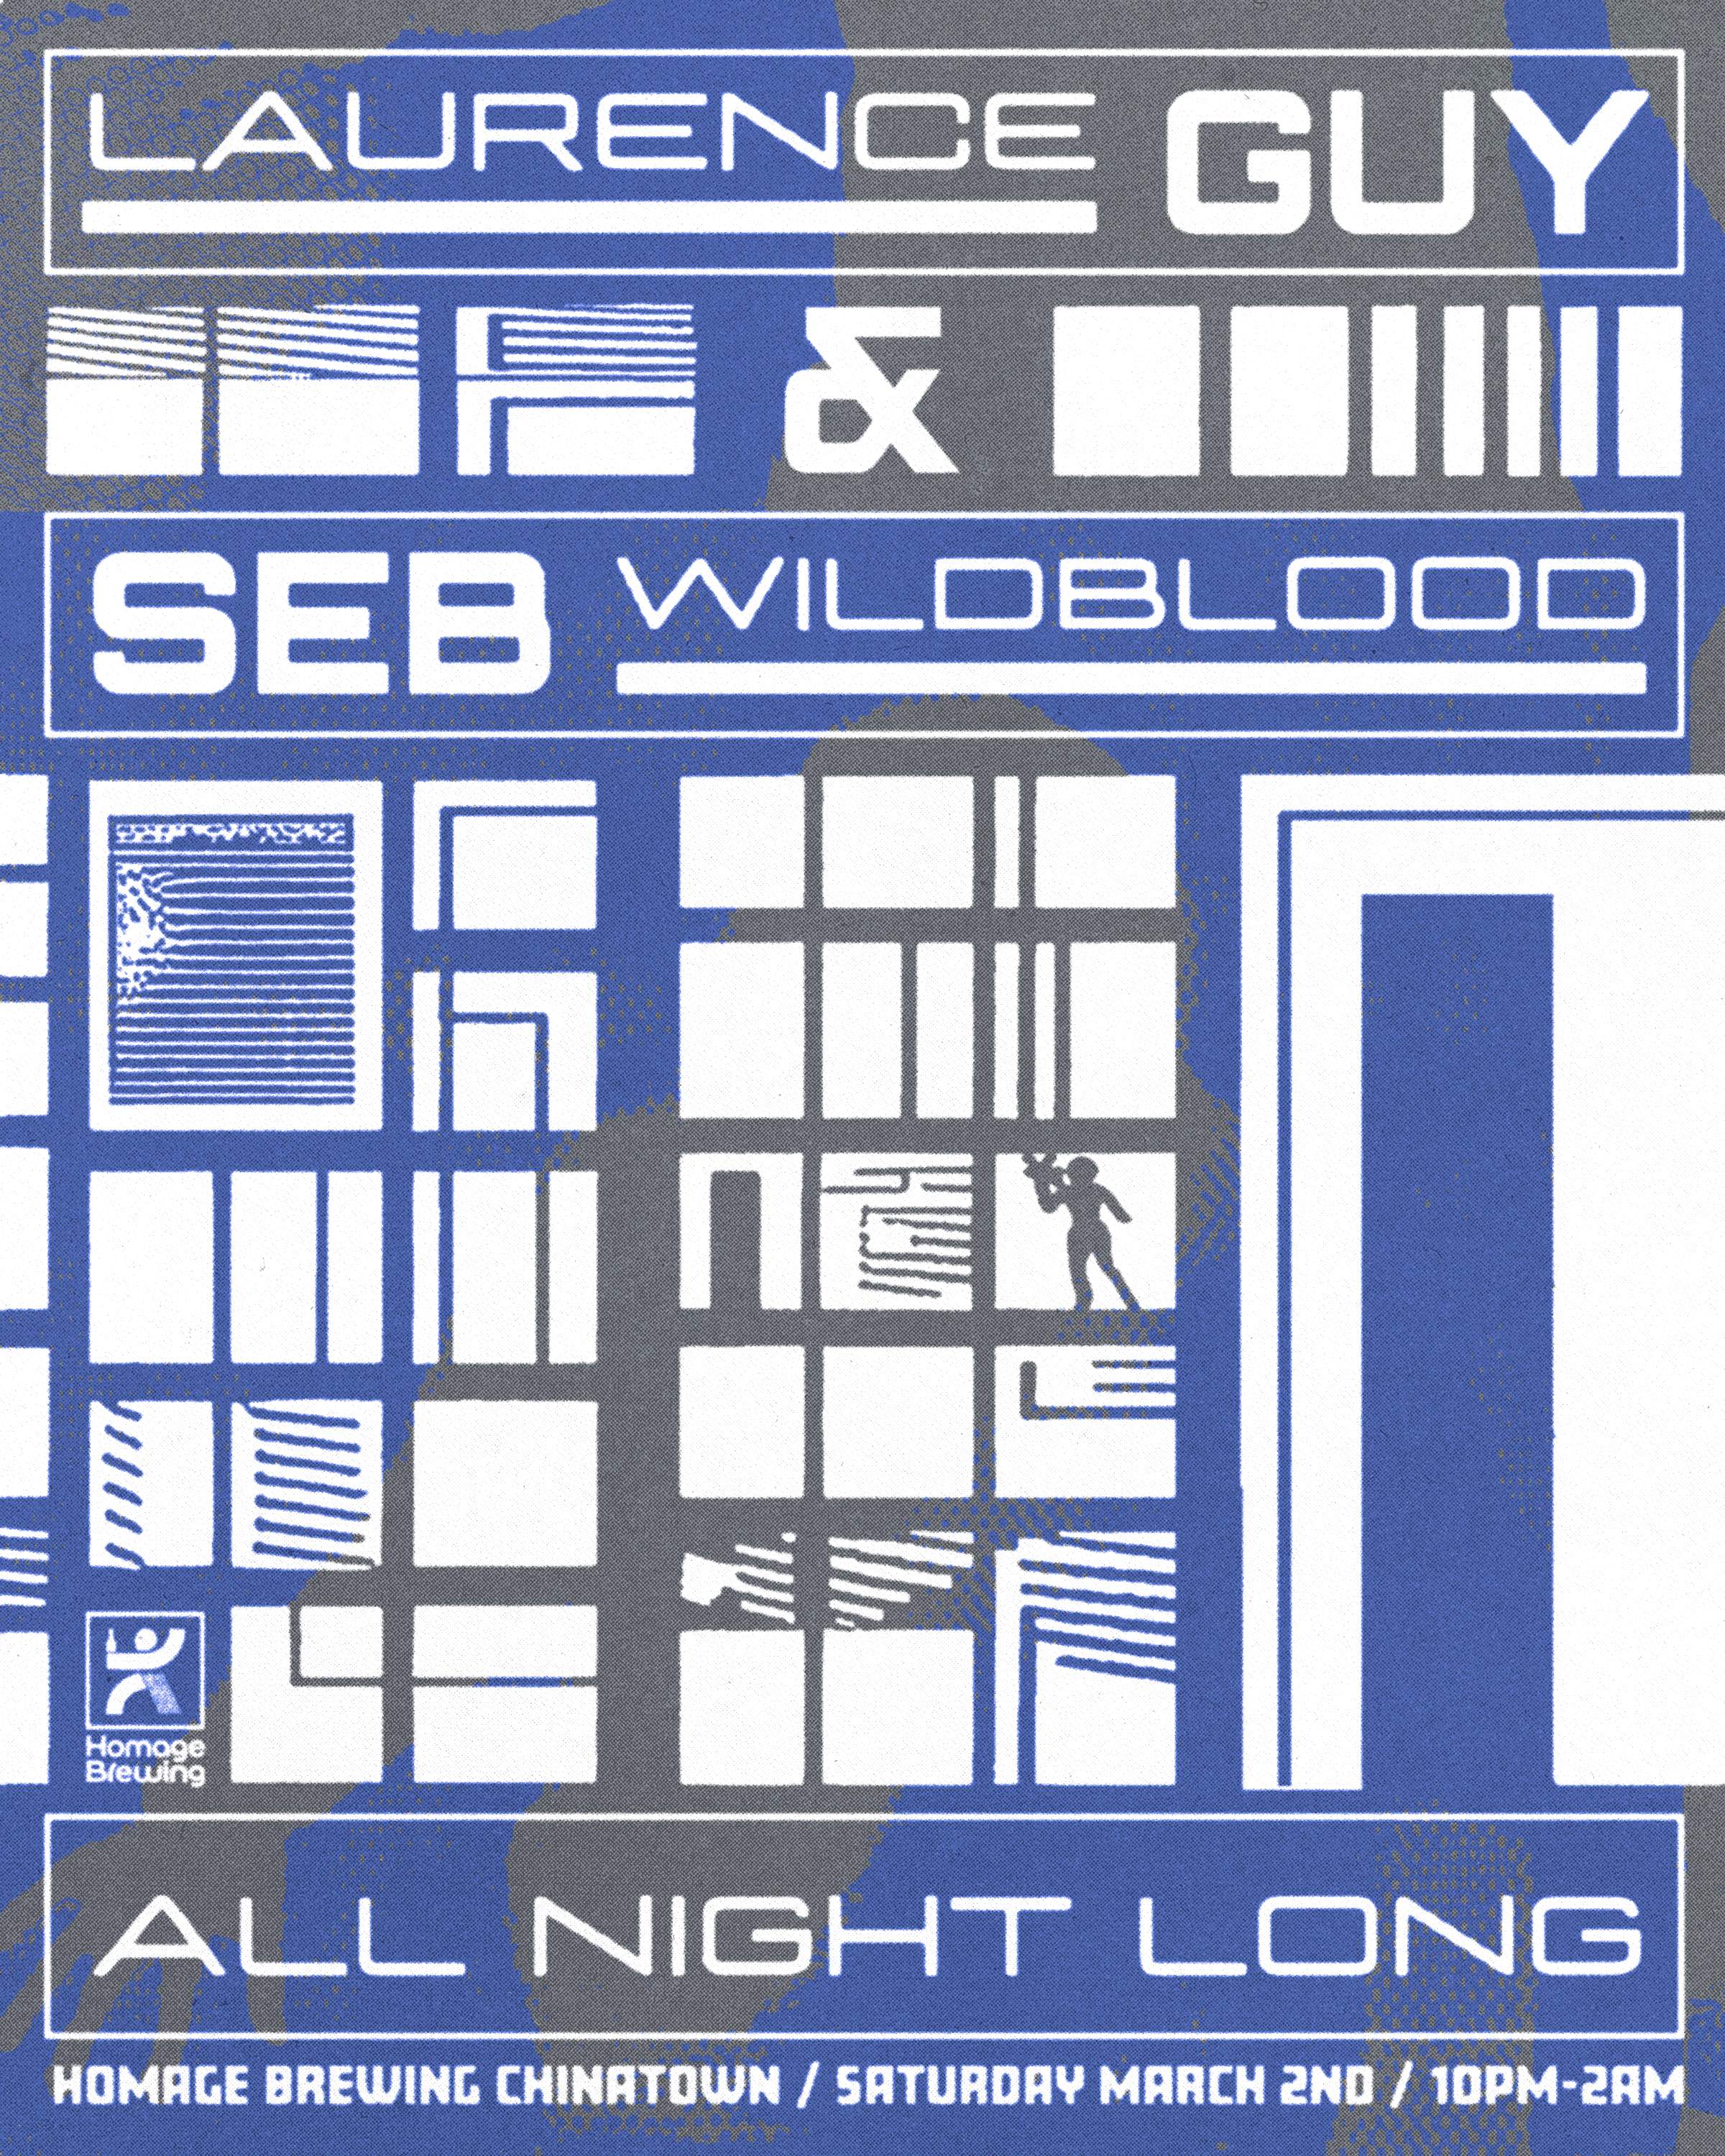 Laurence Guy & Seb Wildblood All Night Long - フライヤー表